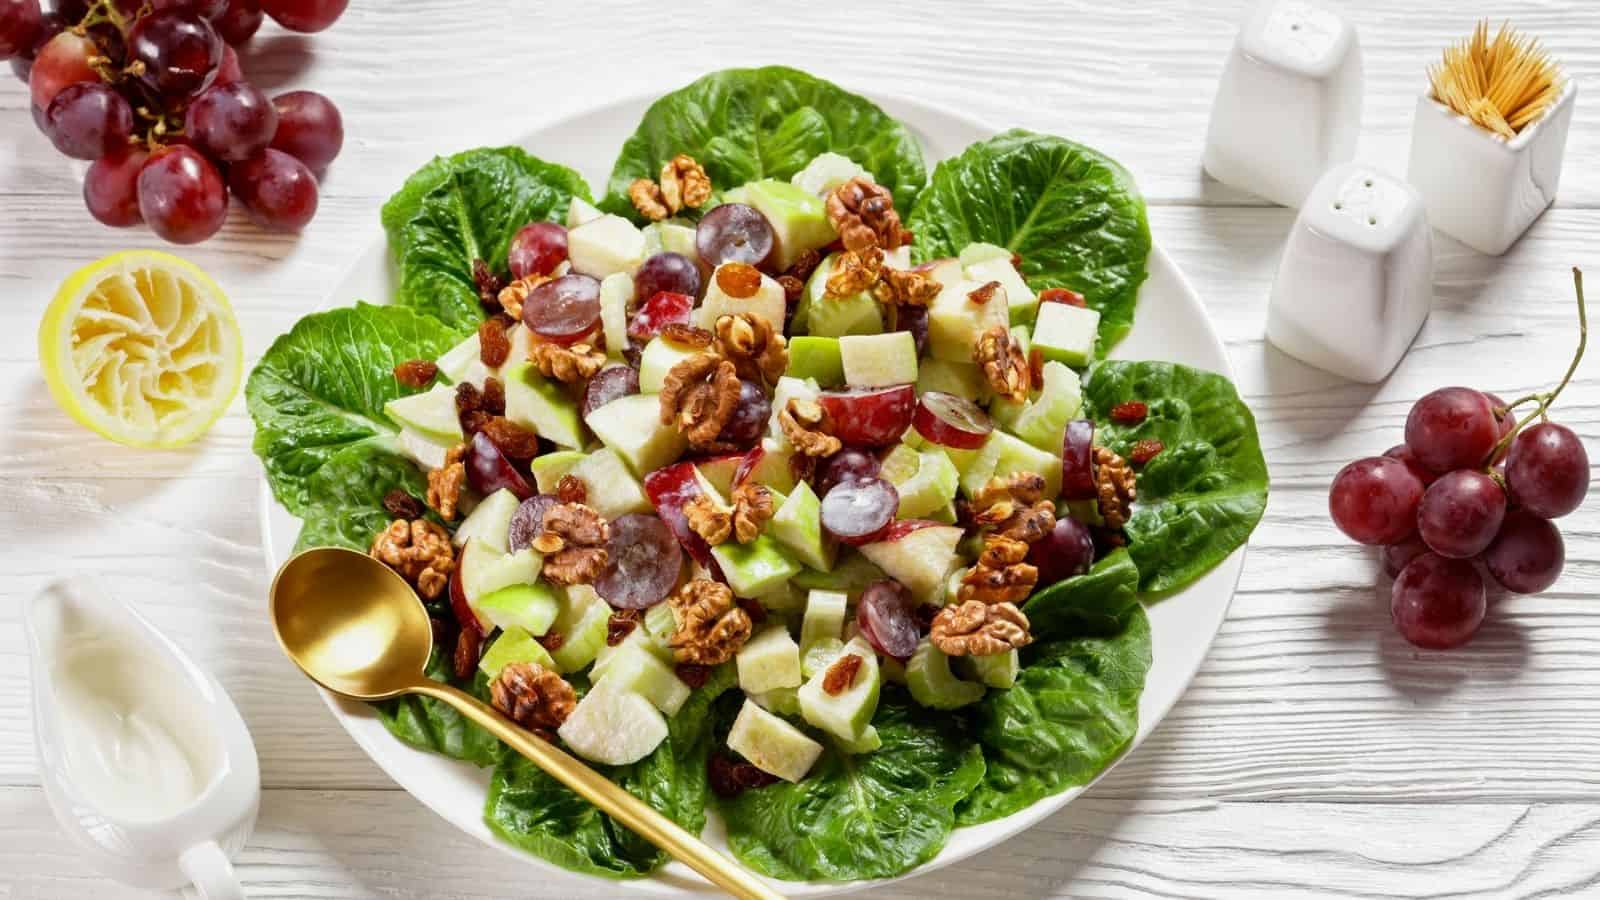 Waldorf Salad laying in lettuce, with apple cubes, walnuts and grapes, served in a white plate.